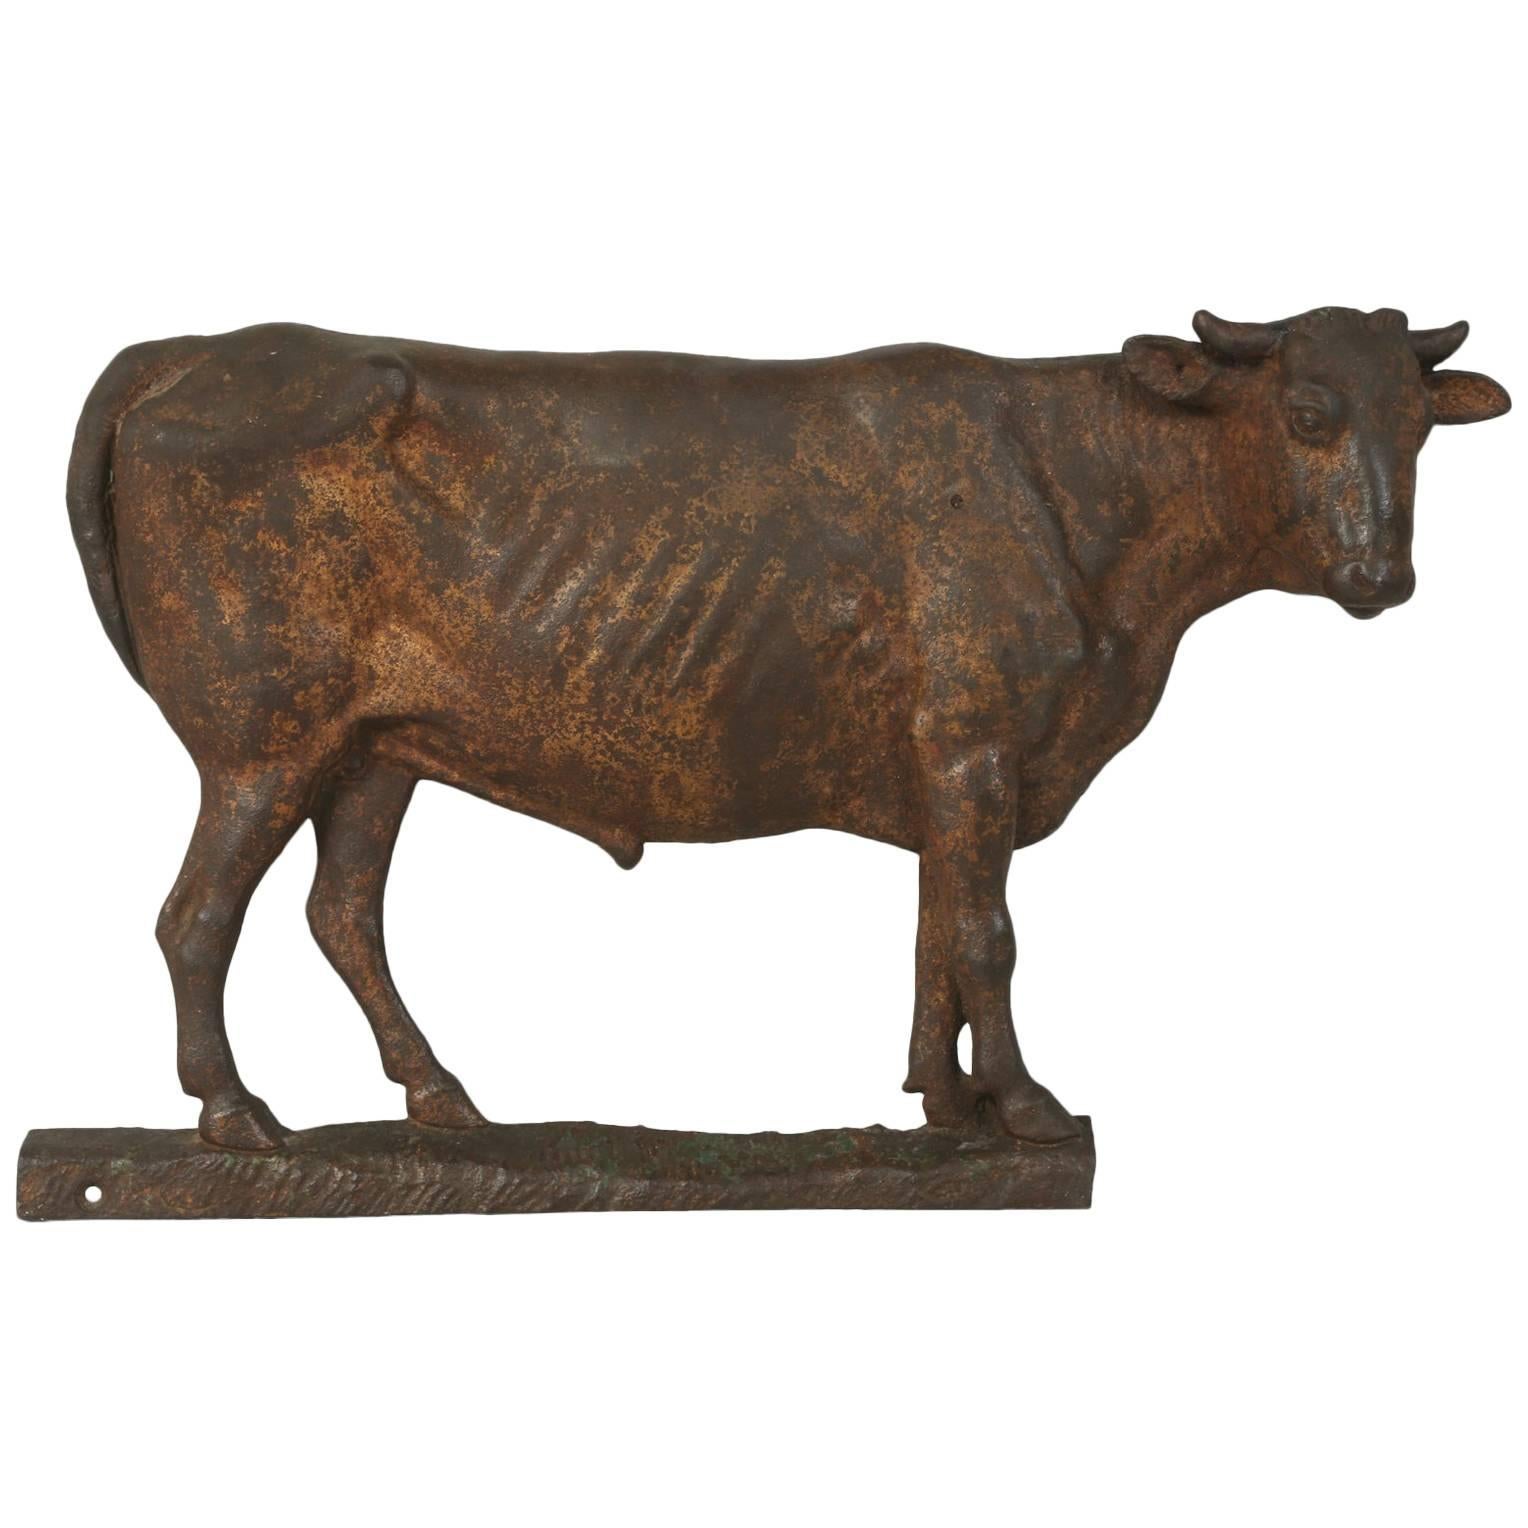 Antique French Steer Sign from a Butch Shop in Cast Iron